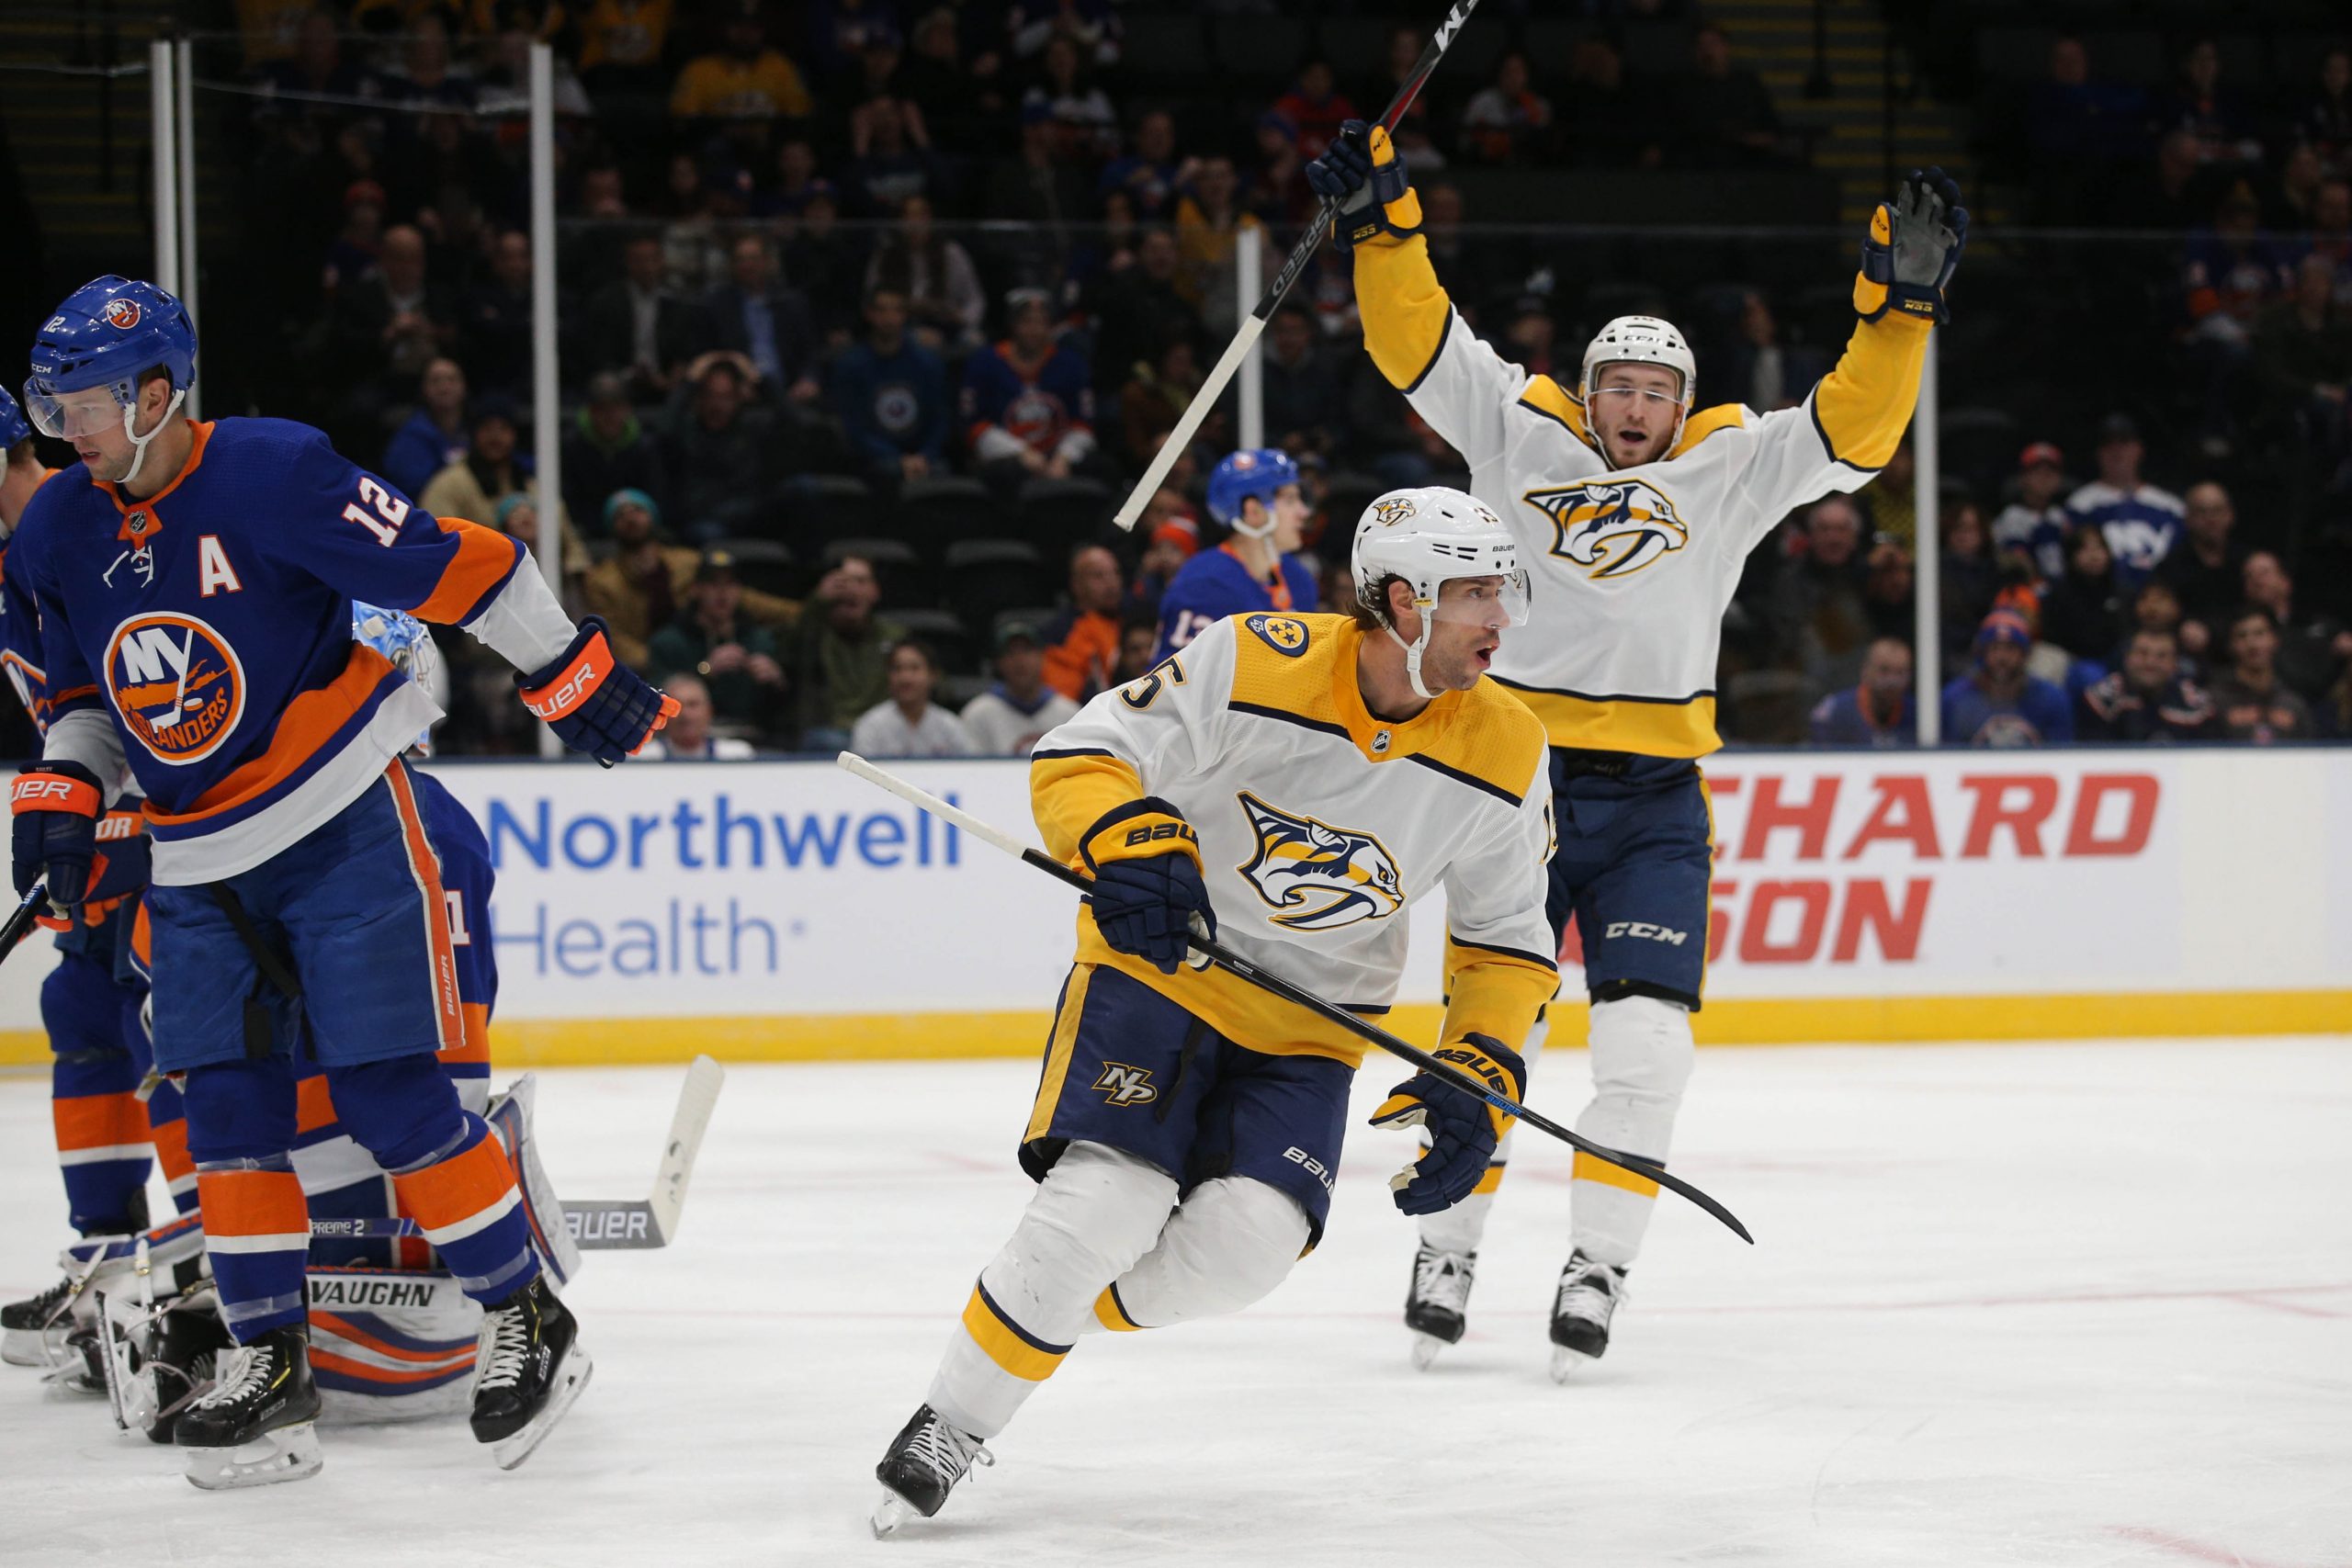 Dec 17, 2019; Uniondale, NY, USA; Nashville Predators center Craig Smith (15) celebrates his goal against the New York Islanders with center Colton Sissons (10) during the first period at Nassau Veterans Memorial Coliseum. Mandatory Credit: Brad Penner-USA TODAY Sports